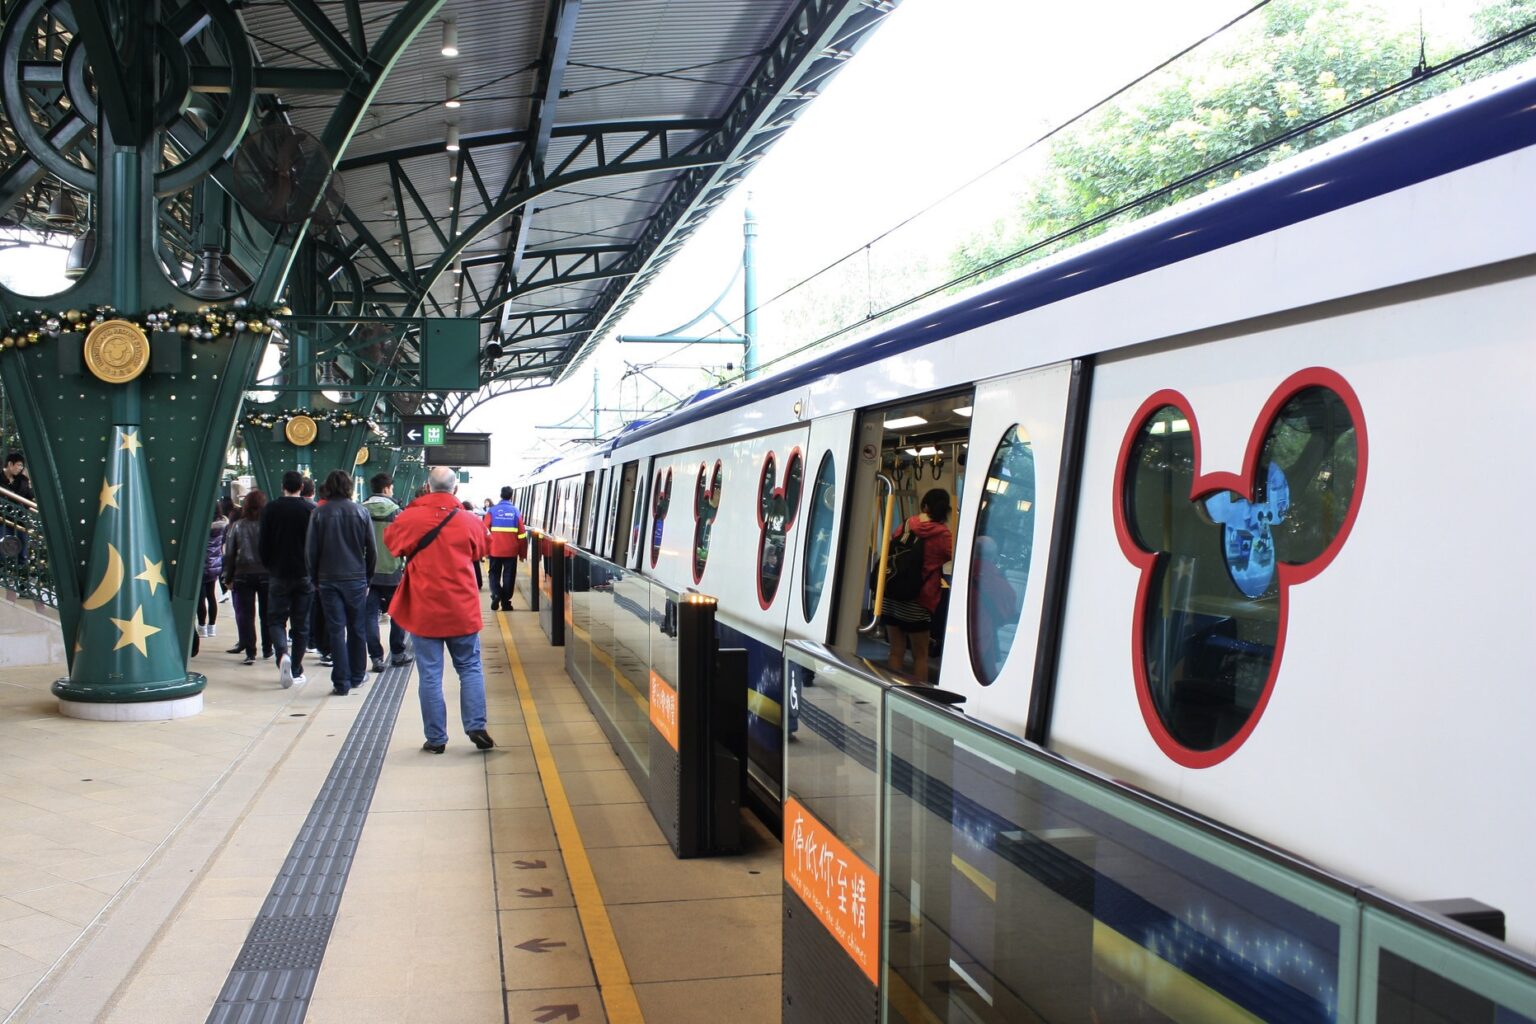 The MTR train at the Disneyland Resort station in Hong Kong. On the right is the train with Mickey Mouse-shaped windows. On the left is the platform with people in front of the train.